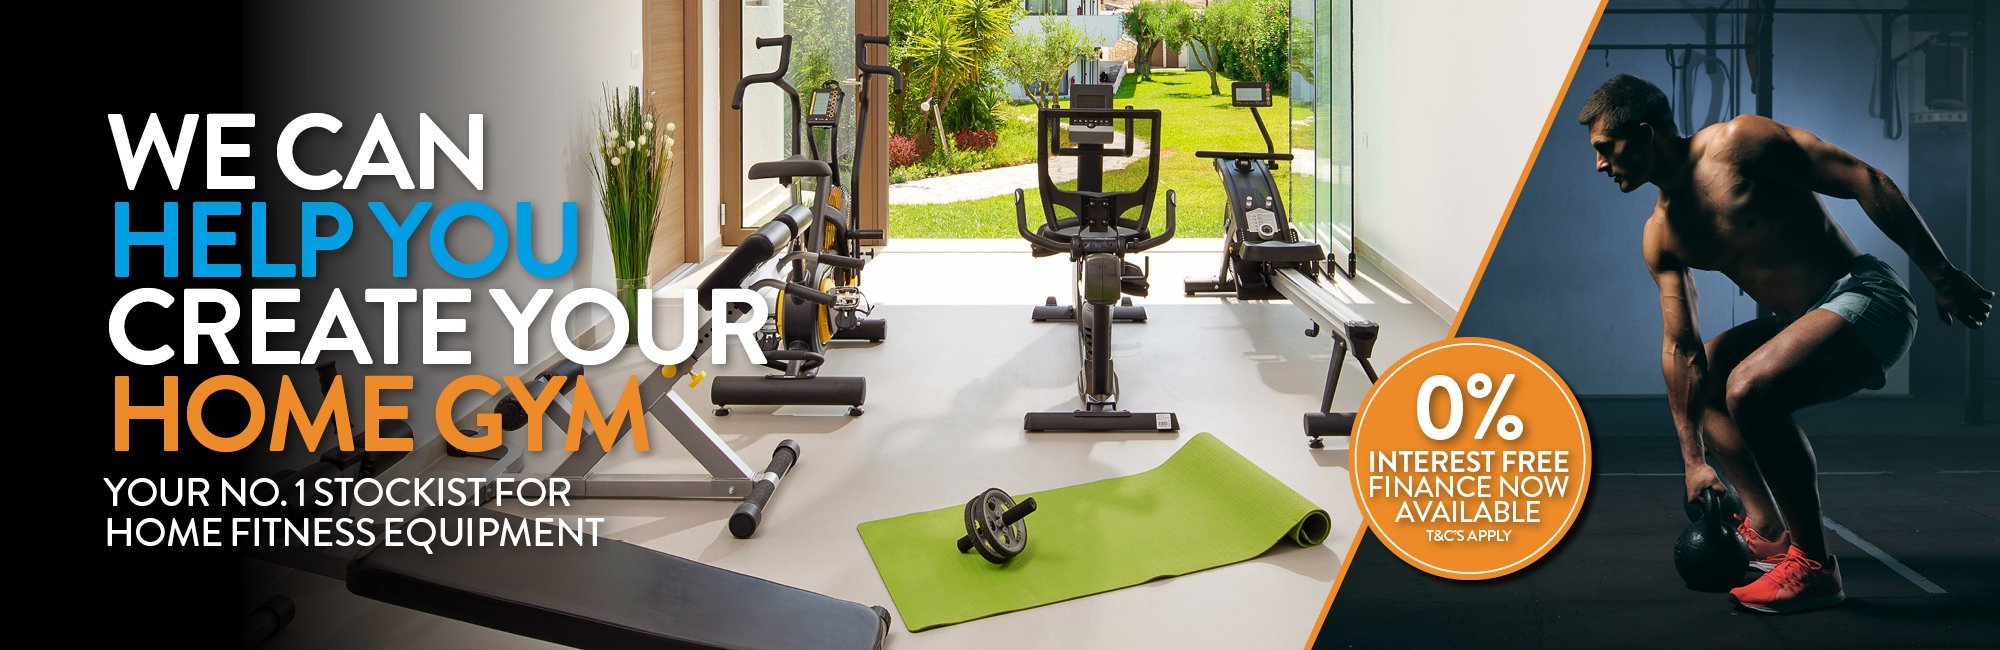 We can help you create your Home Gym